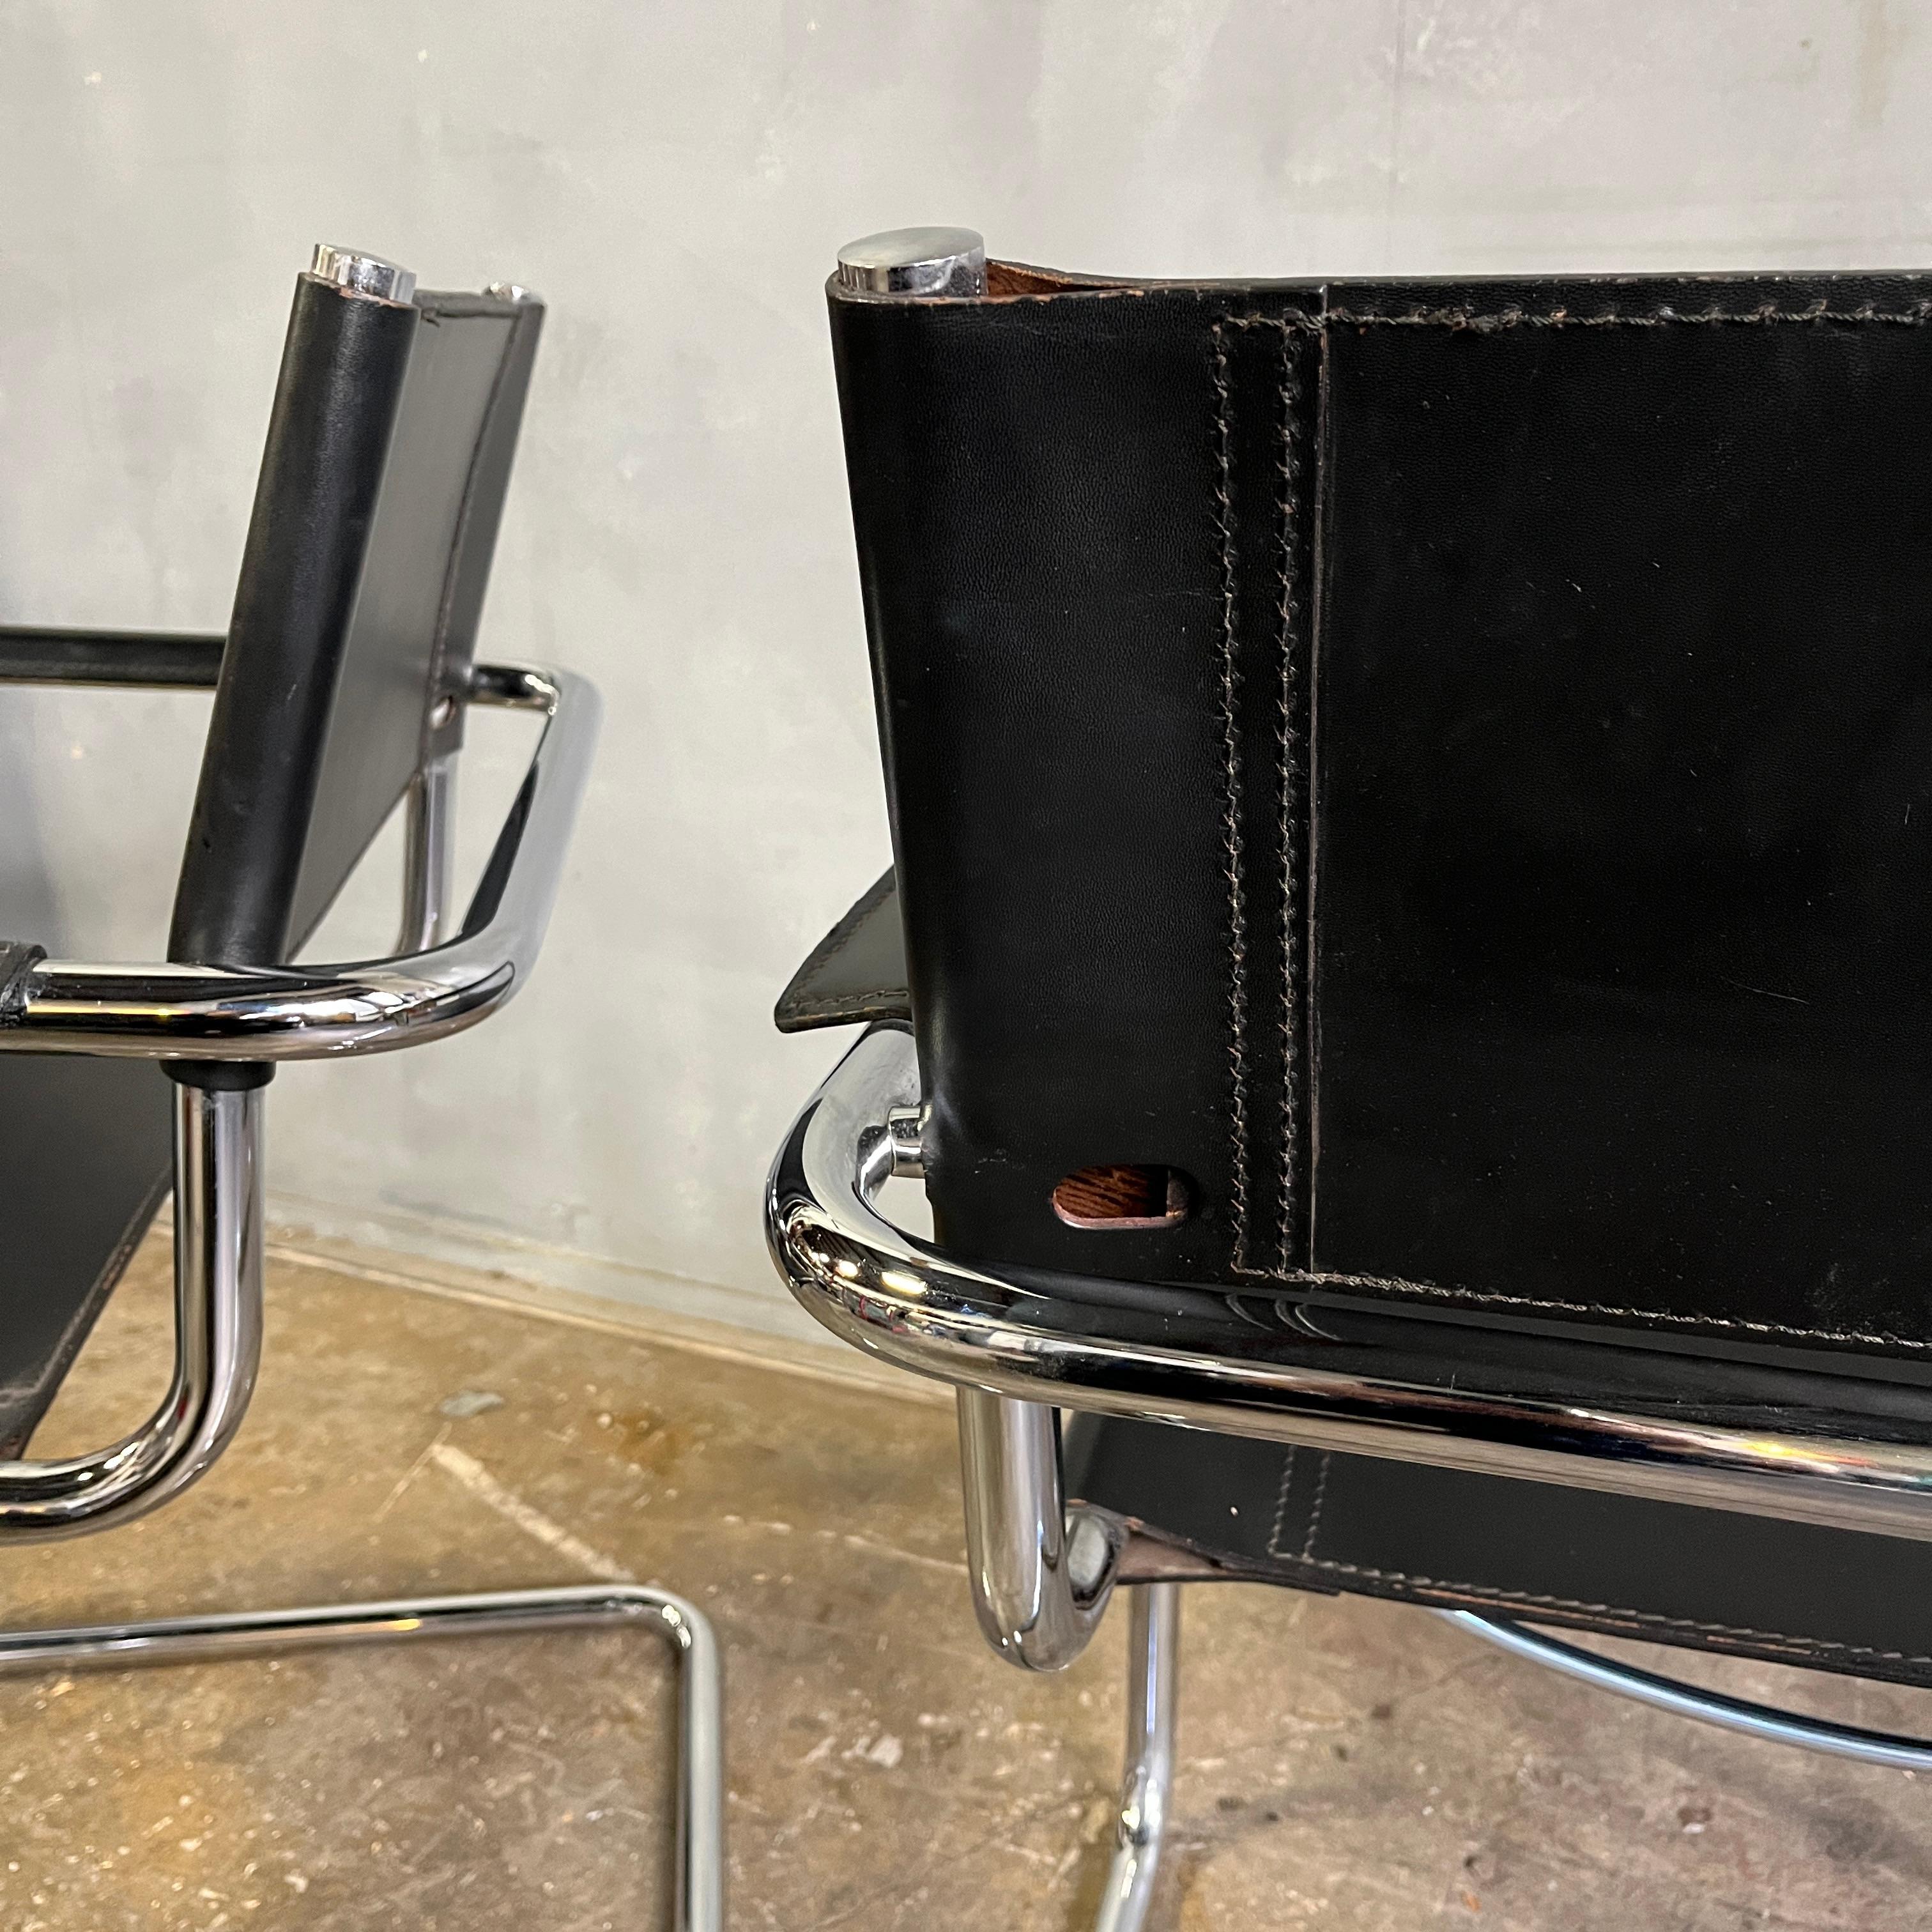 Iconic Bauhaus cantilevered armchairs of chrome tubular steel with black leather sling seat and back and black leather armrests in near pristine condition. Designed by Mart Stam in 1927, chairs of this style were the first cantilevered chairs in